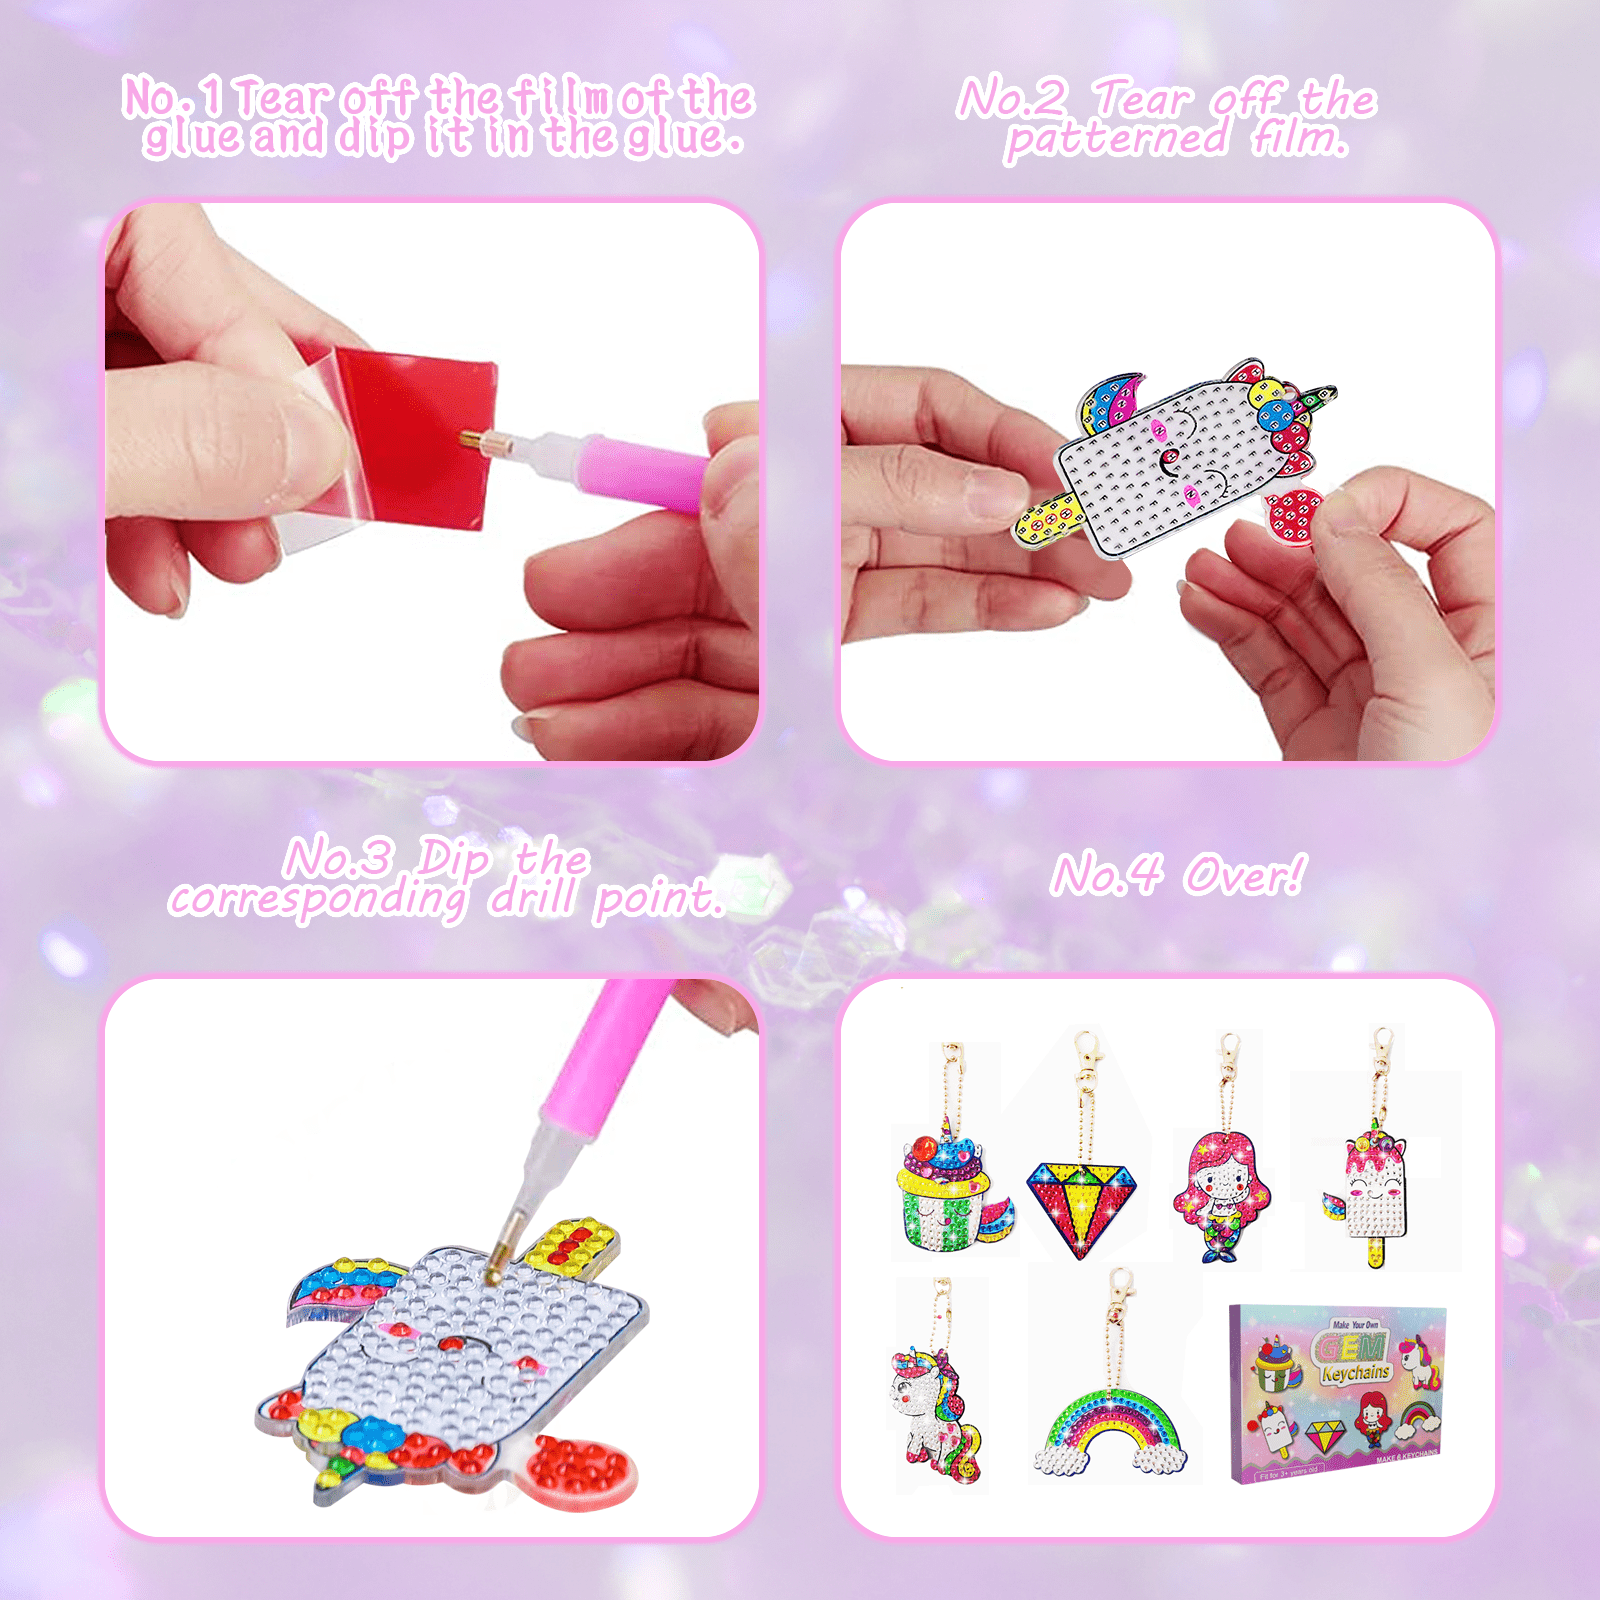 Nardoll Arts and Crafts for Kids Ages 8-12 - Create Your Own Gem Keychains by Number - 5D Diamond Painting Kits Creativity for Girls Boys Toddler